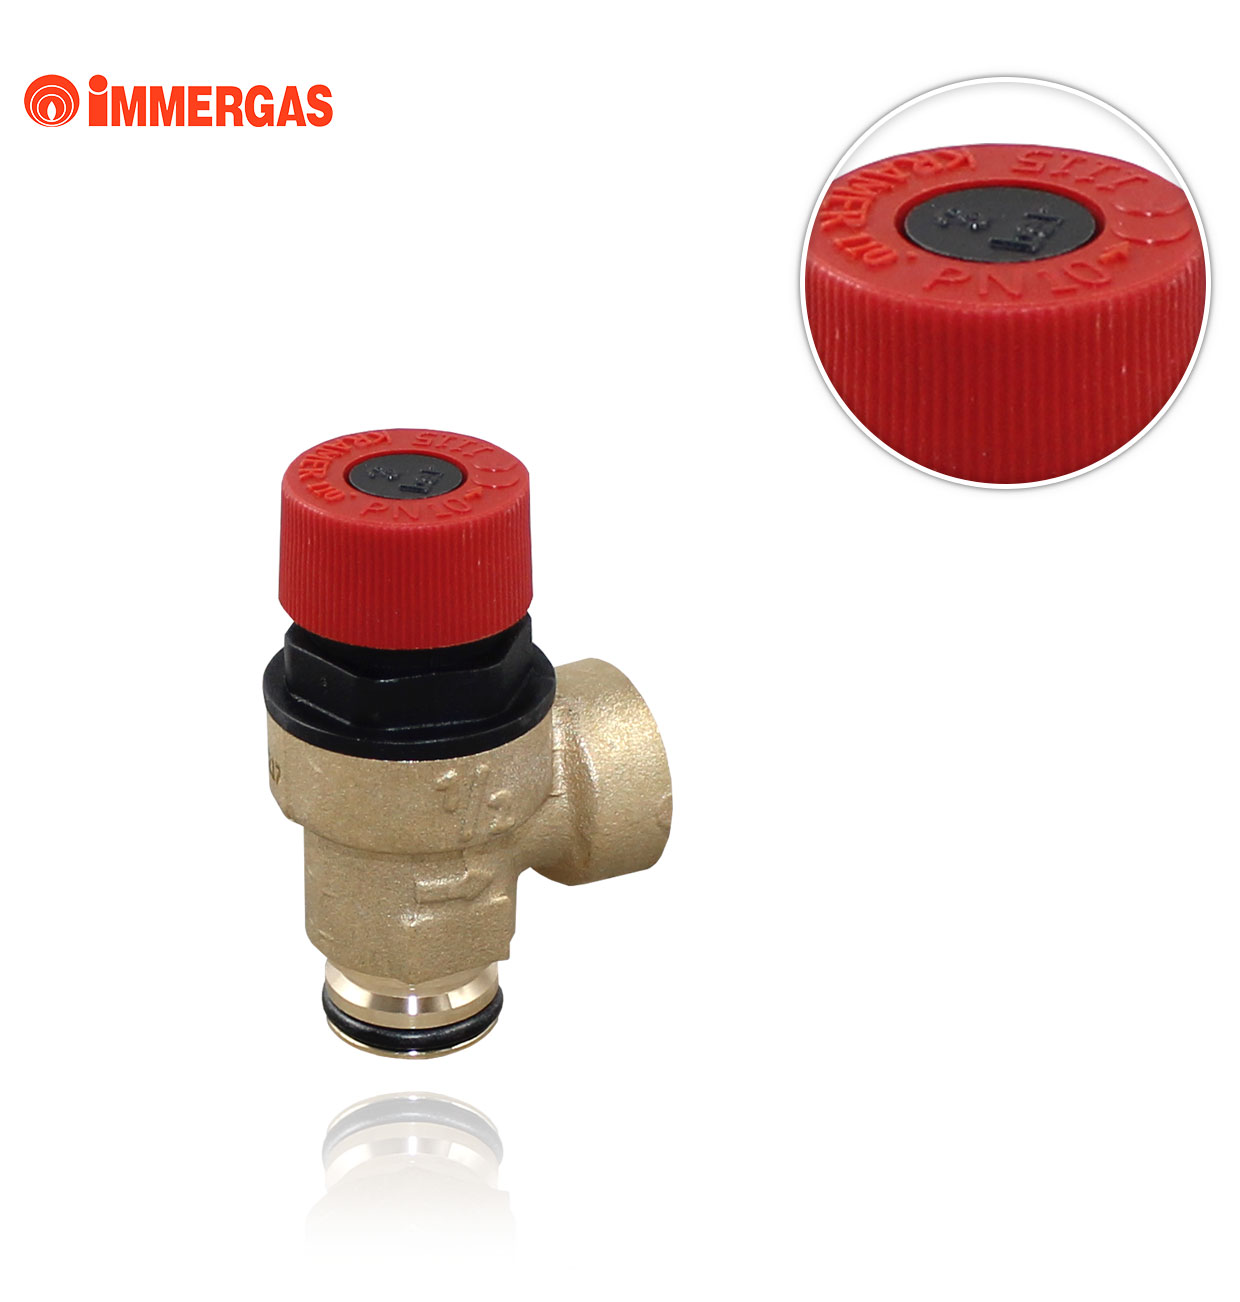 IMMERGAS 3BAR SAFETY VALVE WITH GASKET